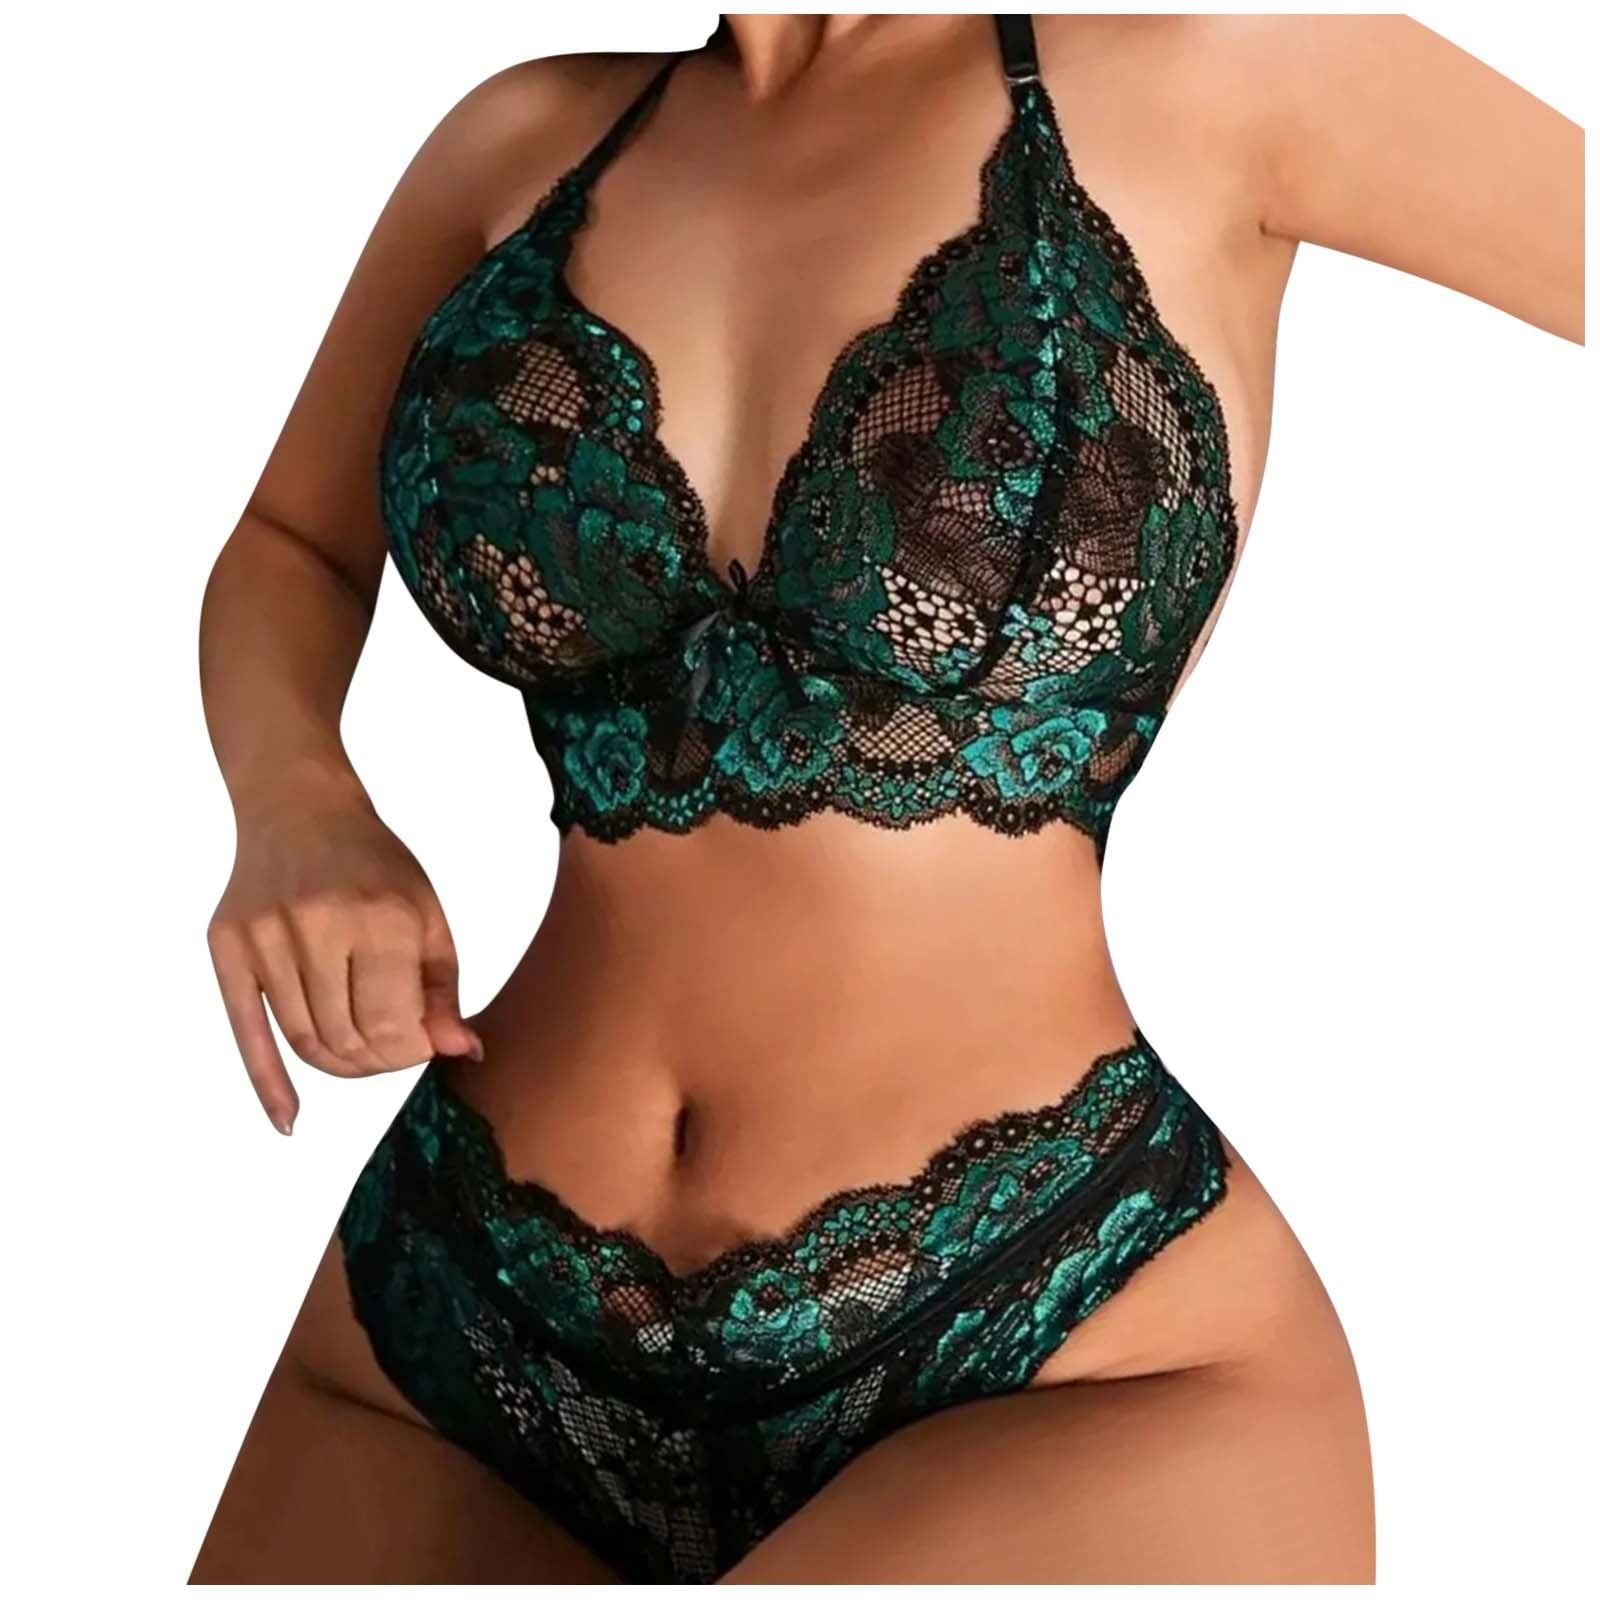  veimia bra to show smaller breasts, large breasts, large  size, wireless bra, slimming bra, green : Clothing, Shoes & Jewelry